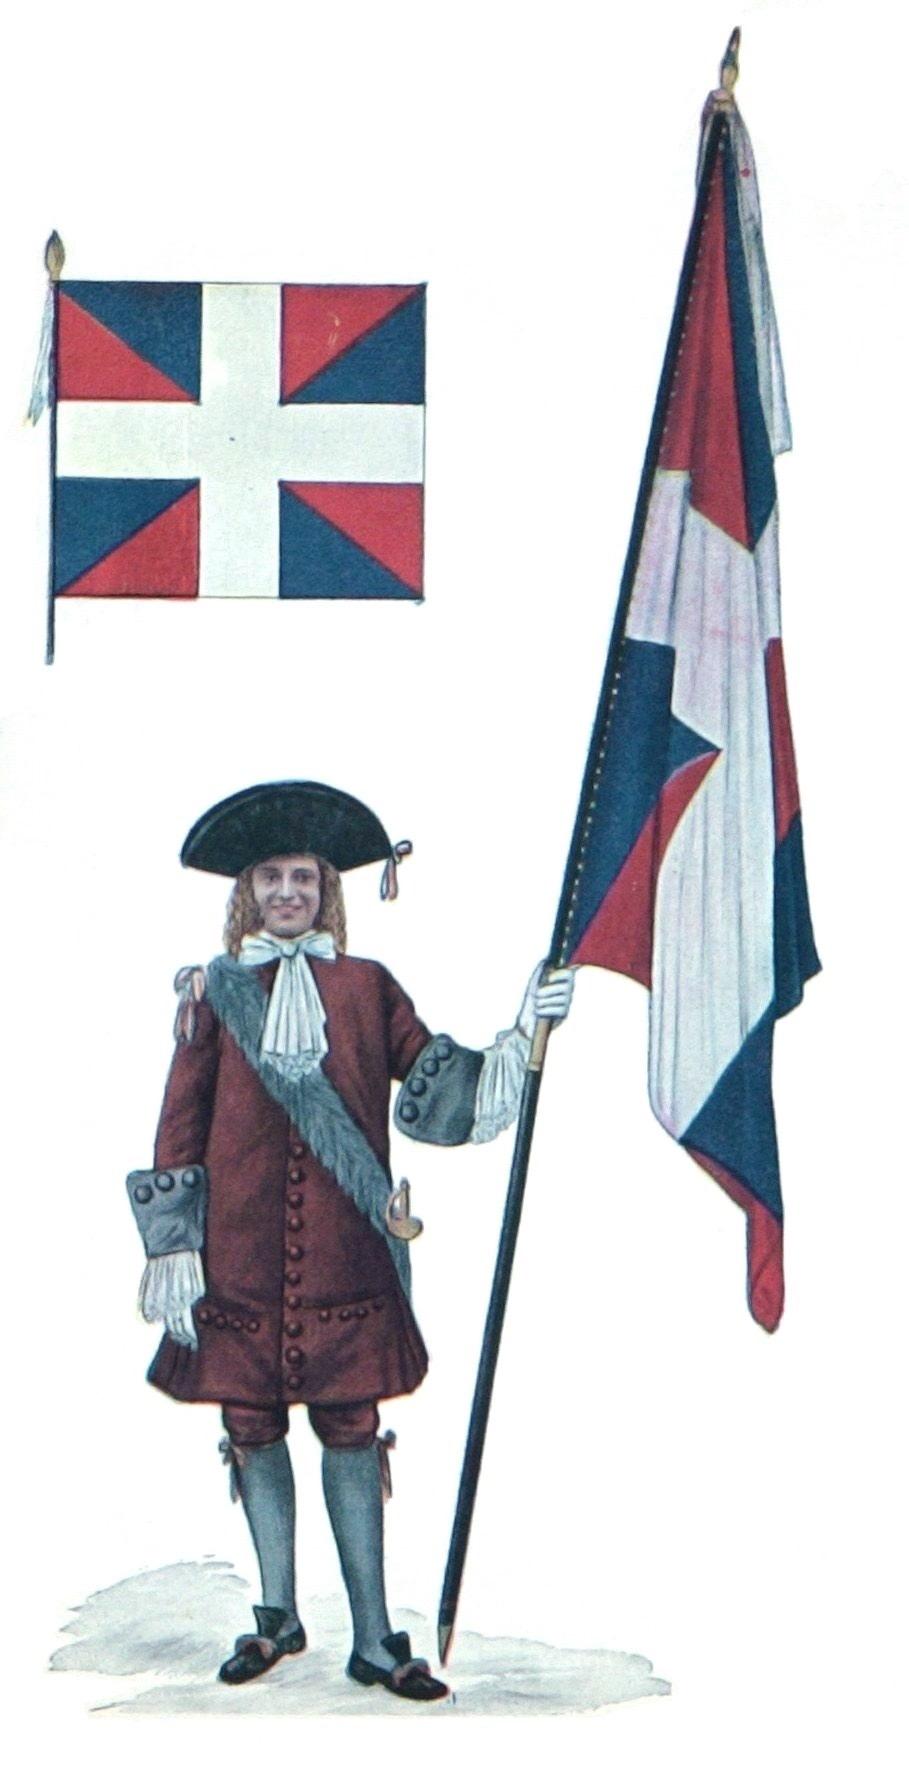 Page 4 Carignan-Salières regiment: the historical context, Illustration: Officer with the colors of the Carignan- Salières (Wikipedia) There were approximately 3,000 people in The French colony in